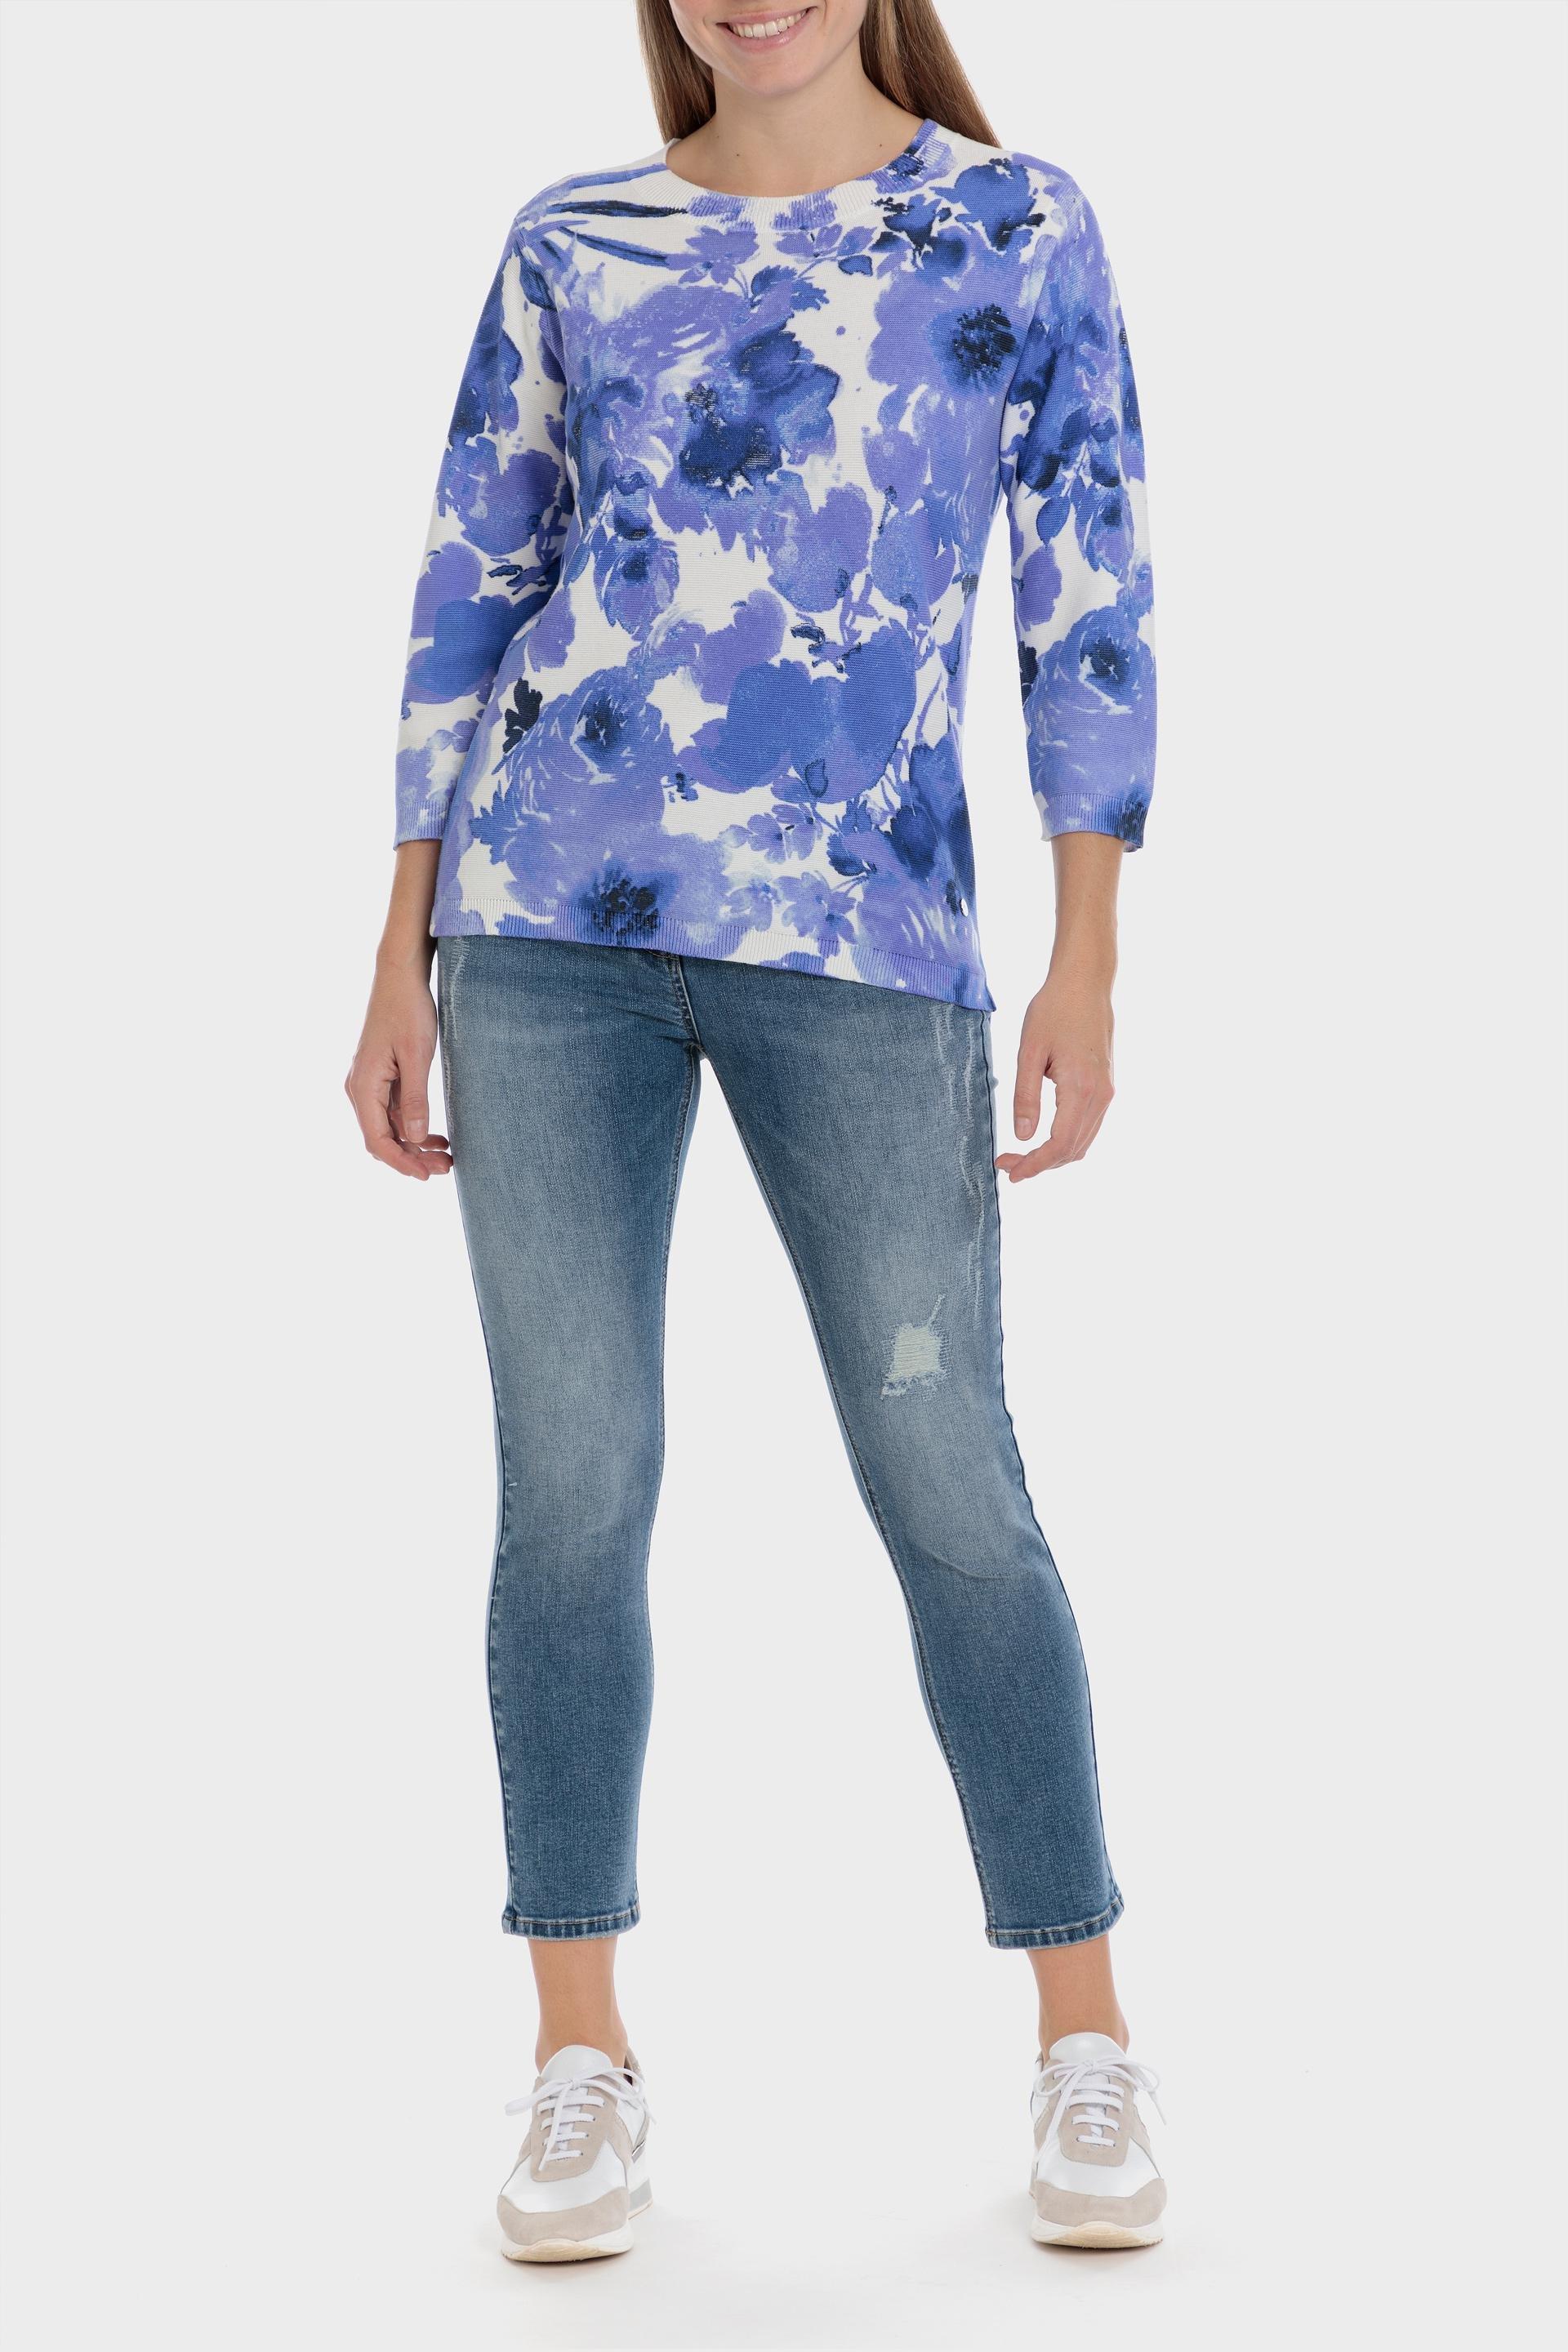 Punt Roma - Blue Floral Print Sweater